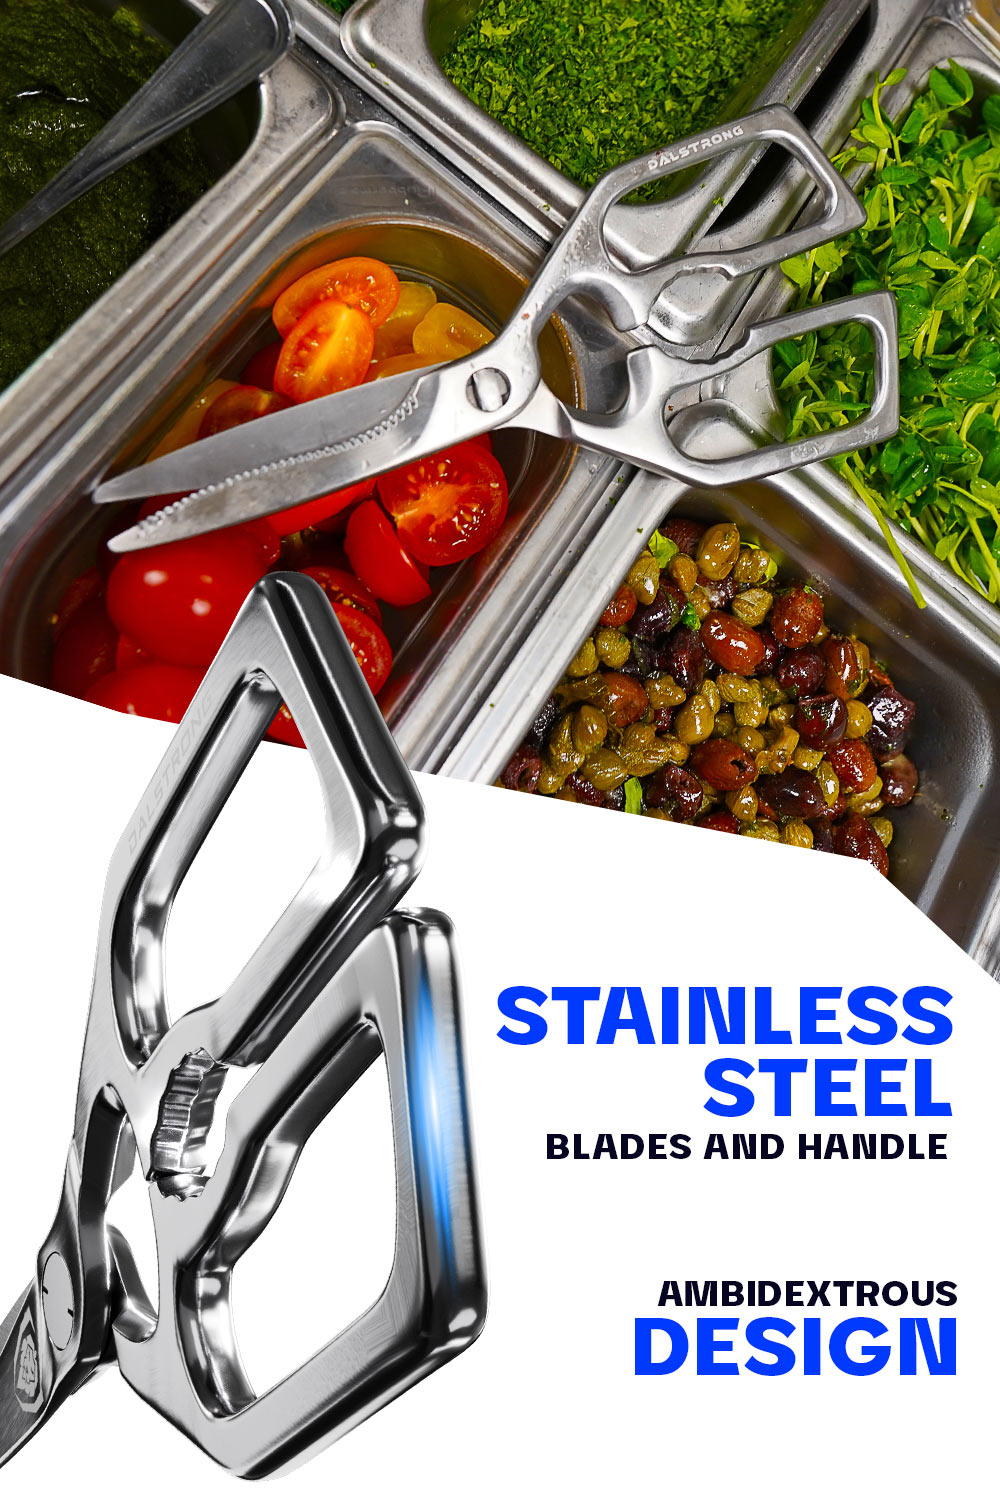 Dalstrong professional kitchen scissors showcasing featuring it's stainless steel blades and handle.